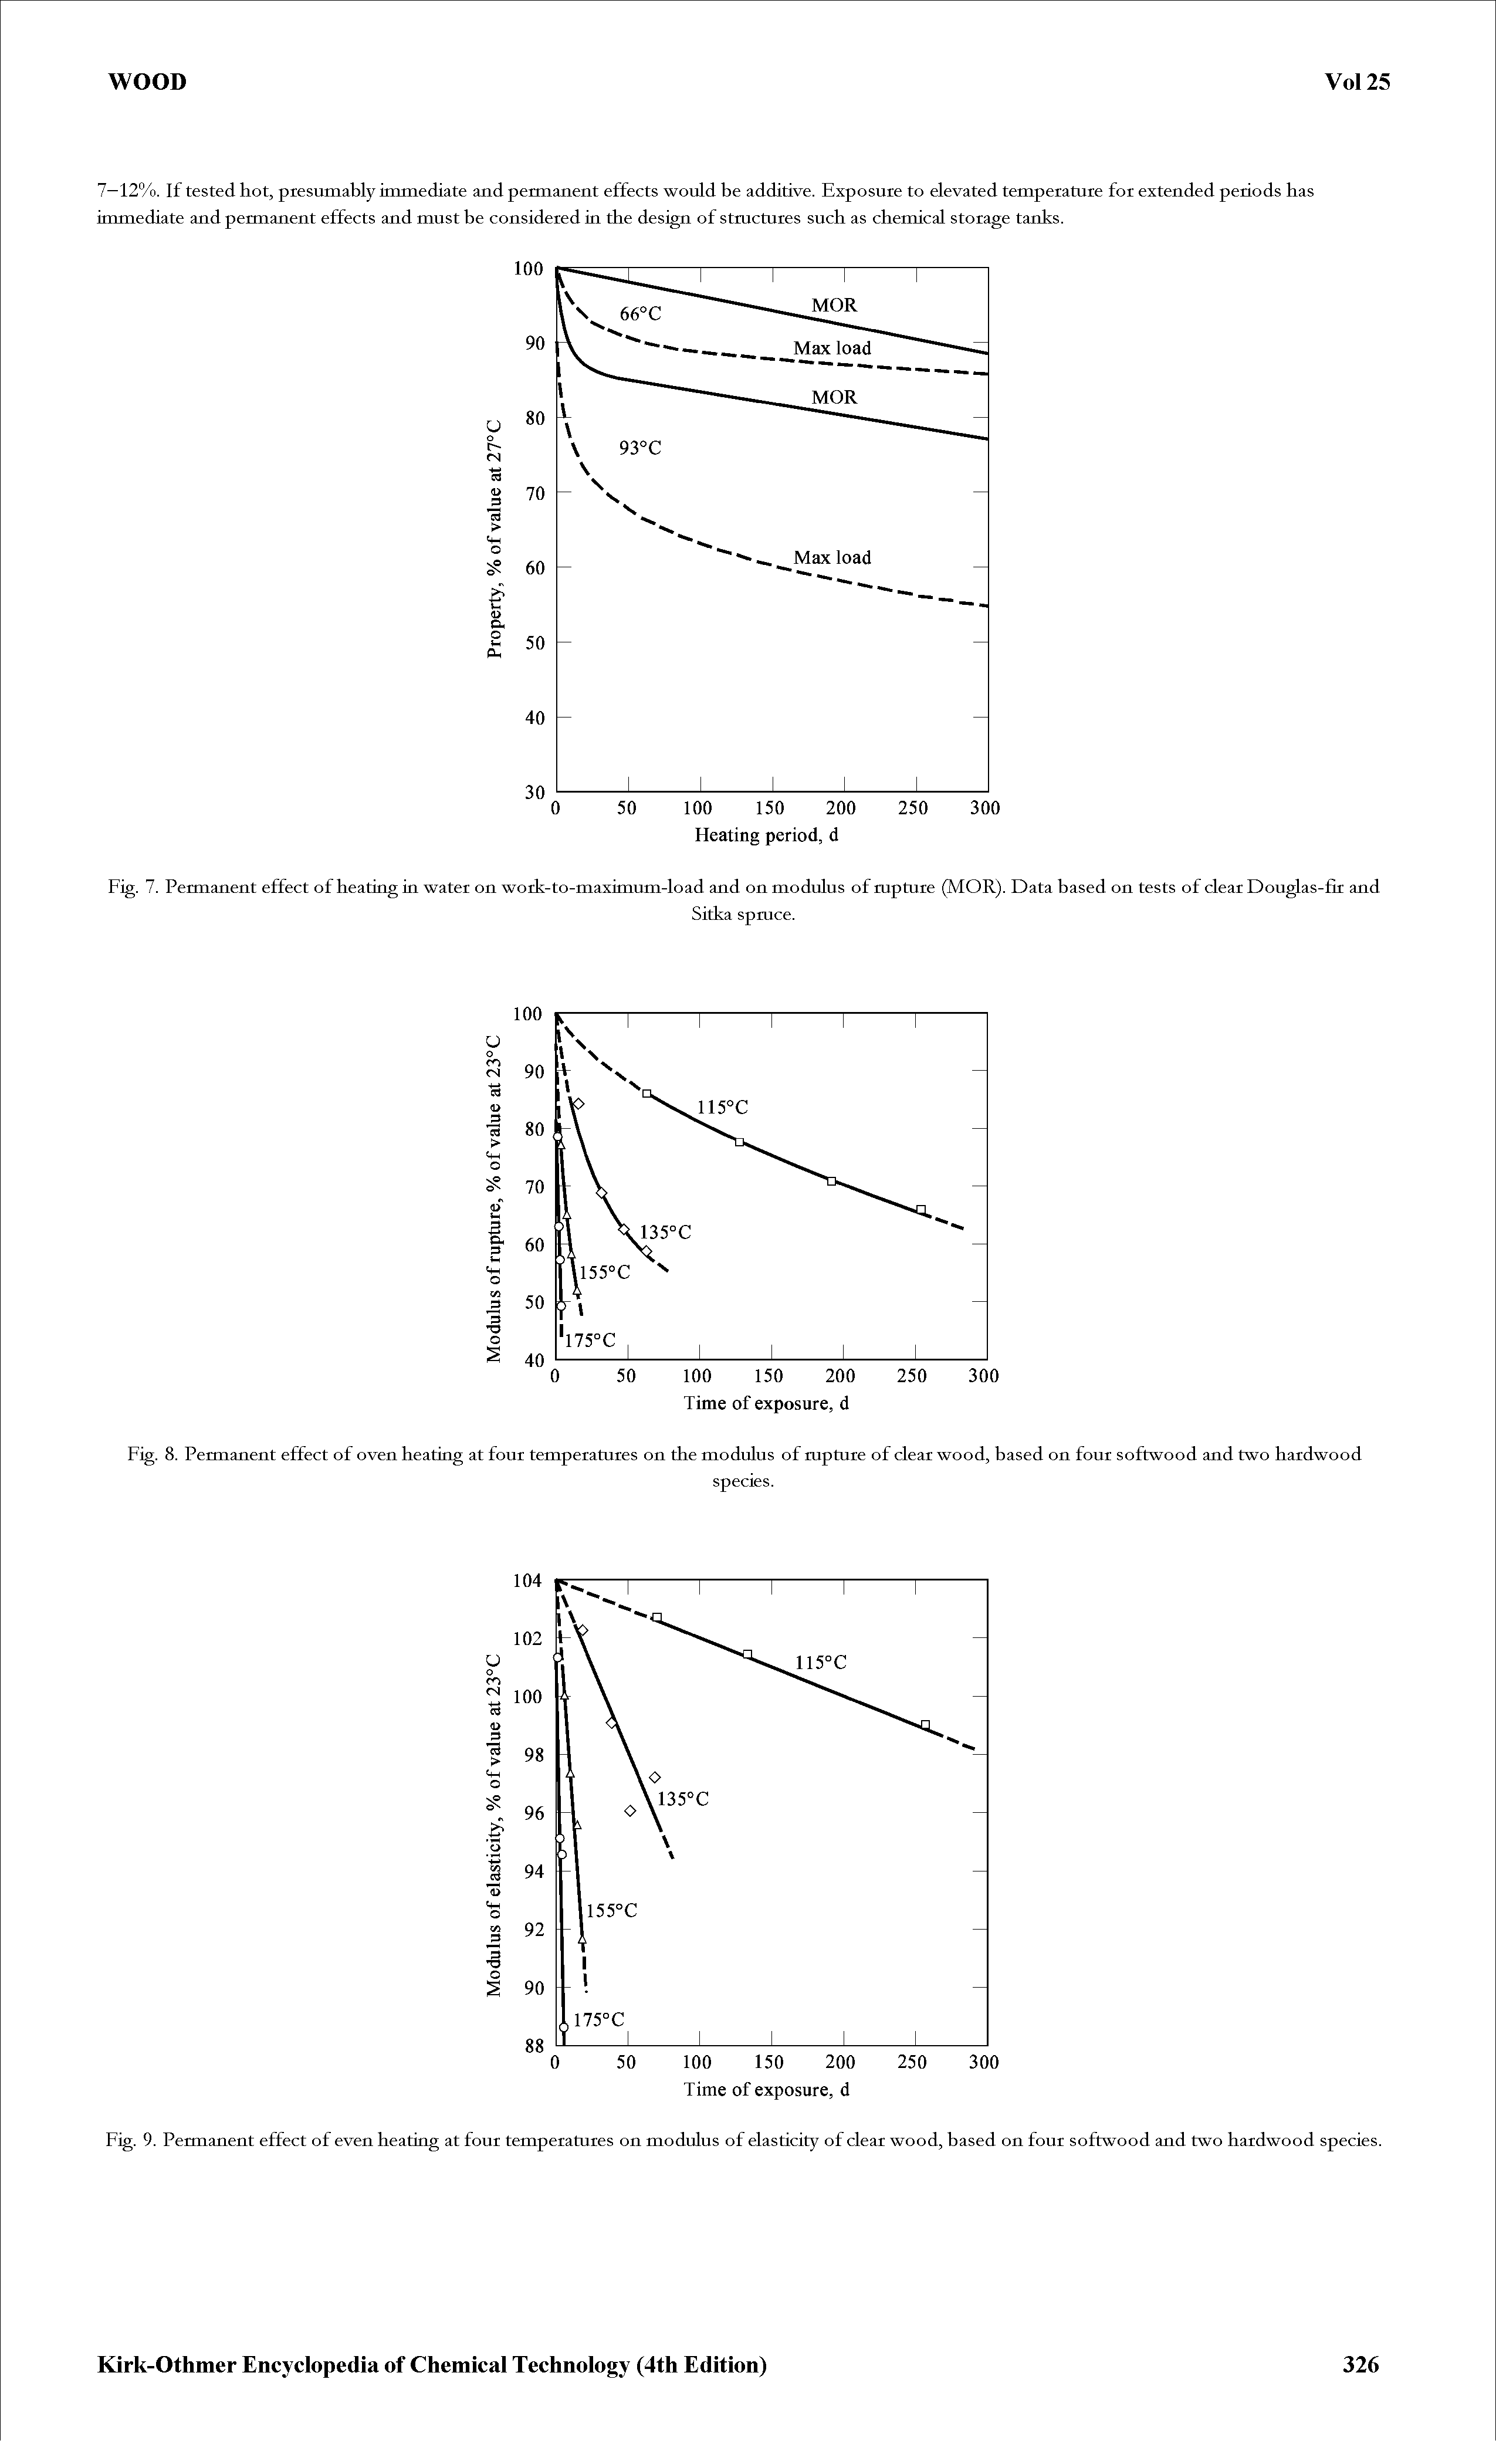 Fig. 9. Permanent effect of even heating at four temperatures on modulus of elasticity of clear wood, based on four softwood and two hardwood species.